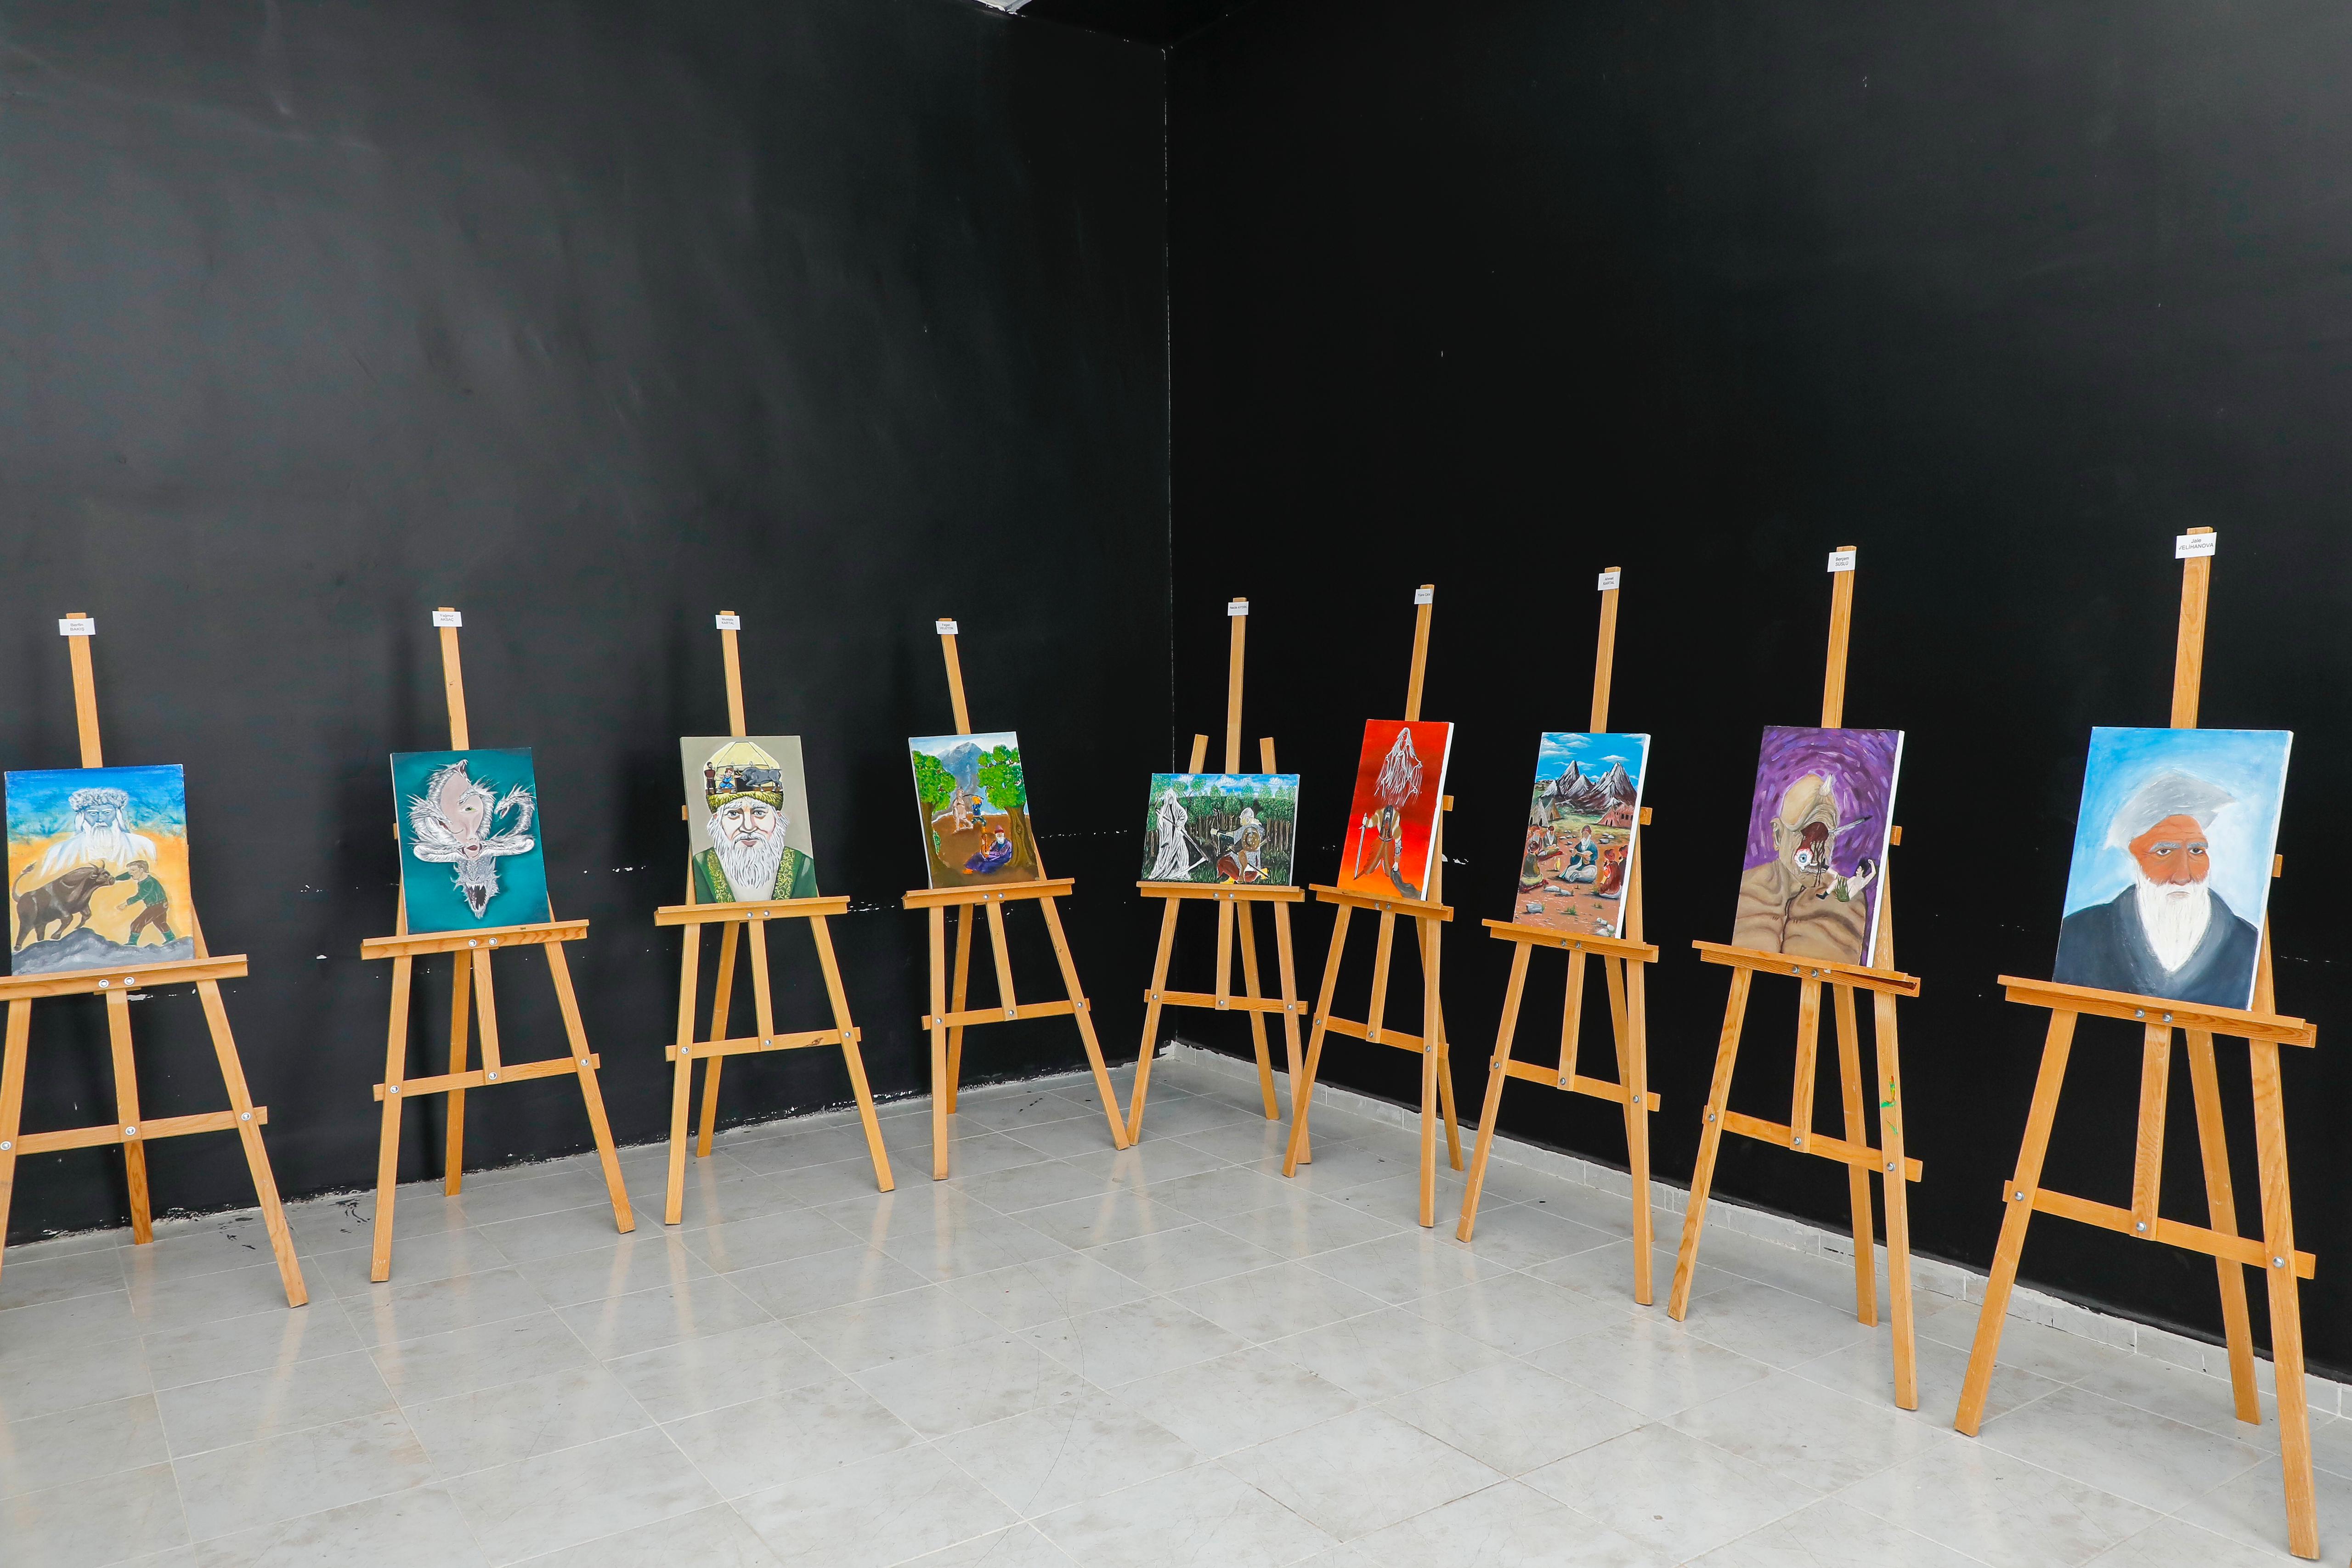 Painting Department Students Opened the End of Year Exhibition Themed on Dede Korkut Stories at the Cultural Center